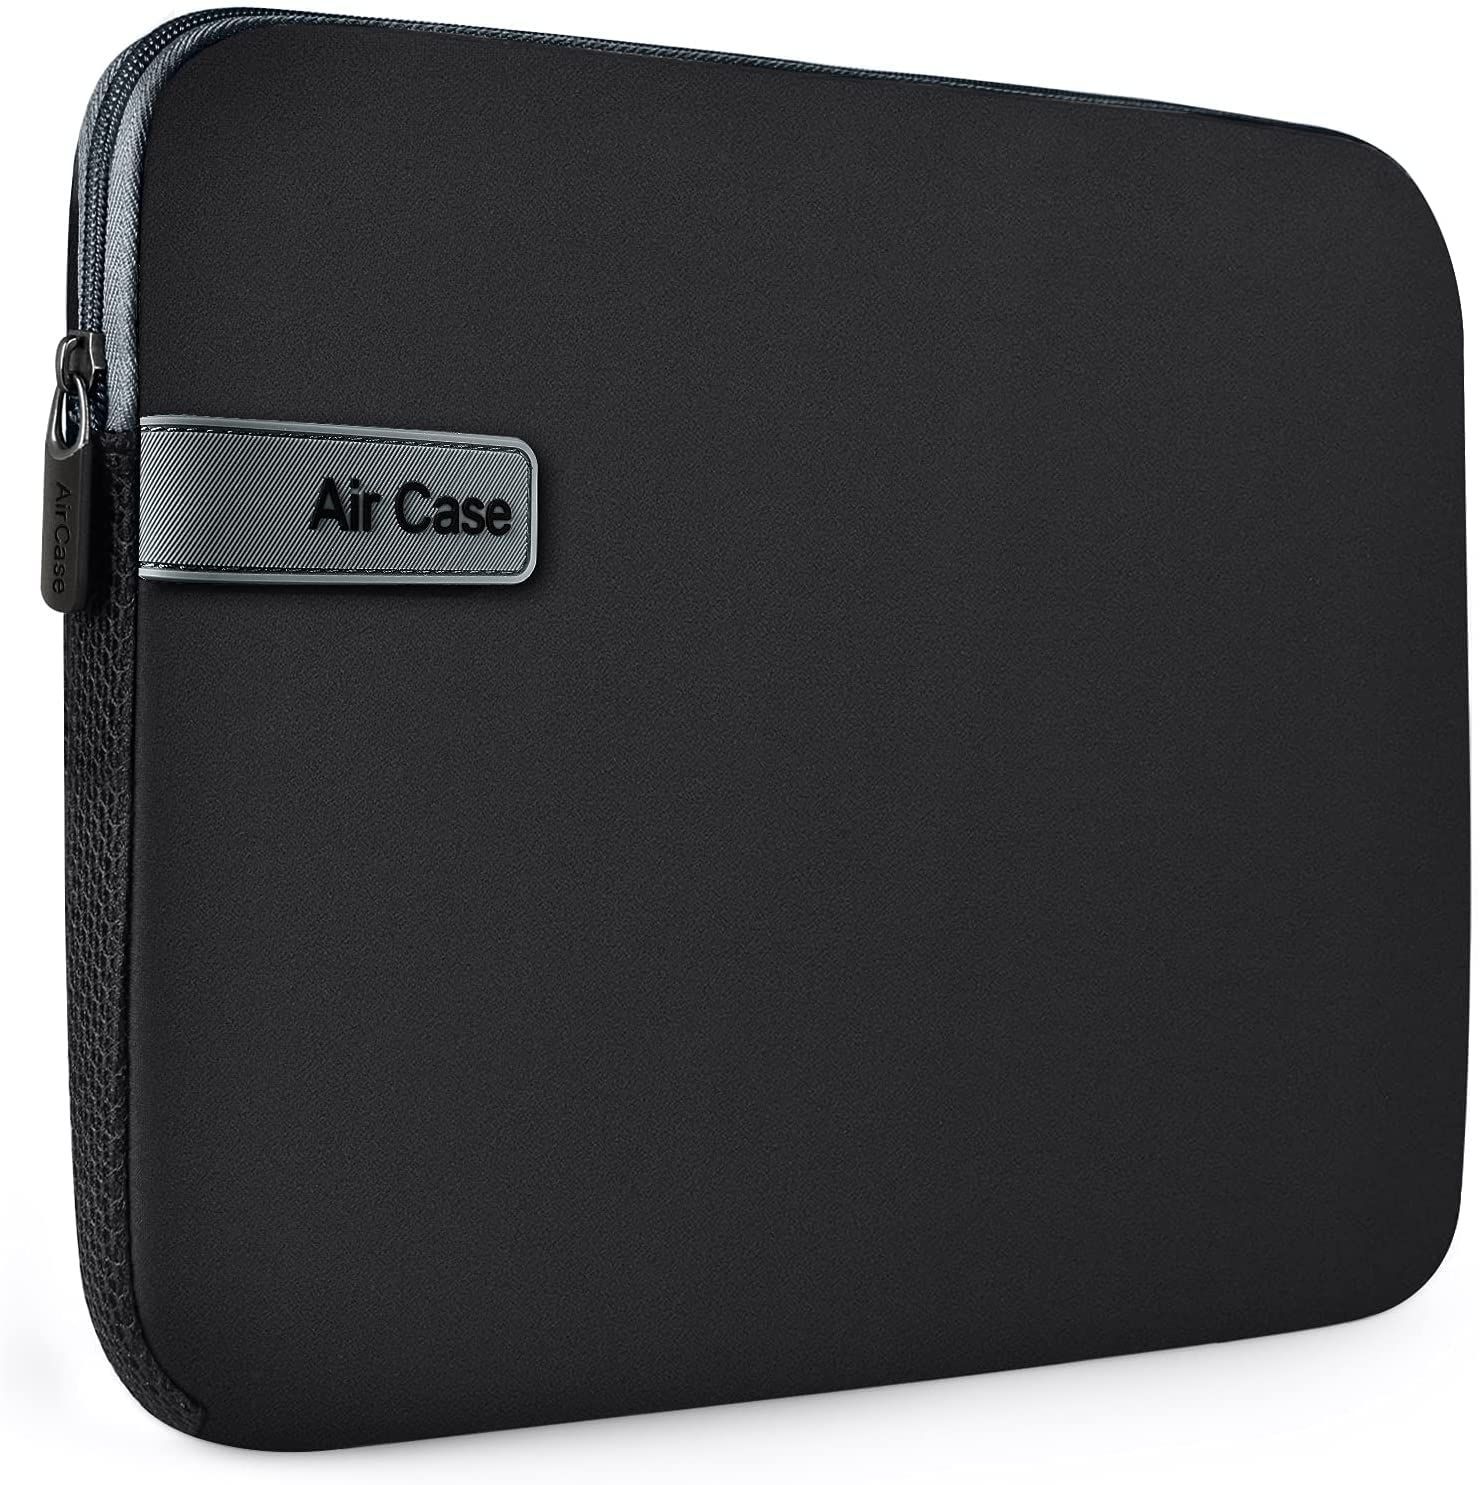 AirCase Protective Laptop Bag Sleeve fits Upto 14.1" Laptop/MacBook, Wrinkle Free, Padded, Waterproof Light Neoprene case Cover Pouch, for Men & Women, Black- 6 Months Warranty